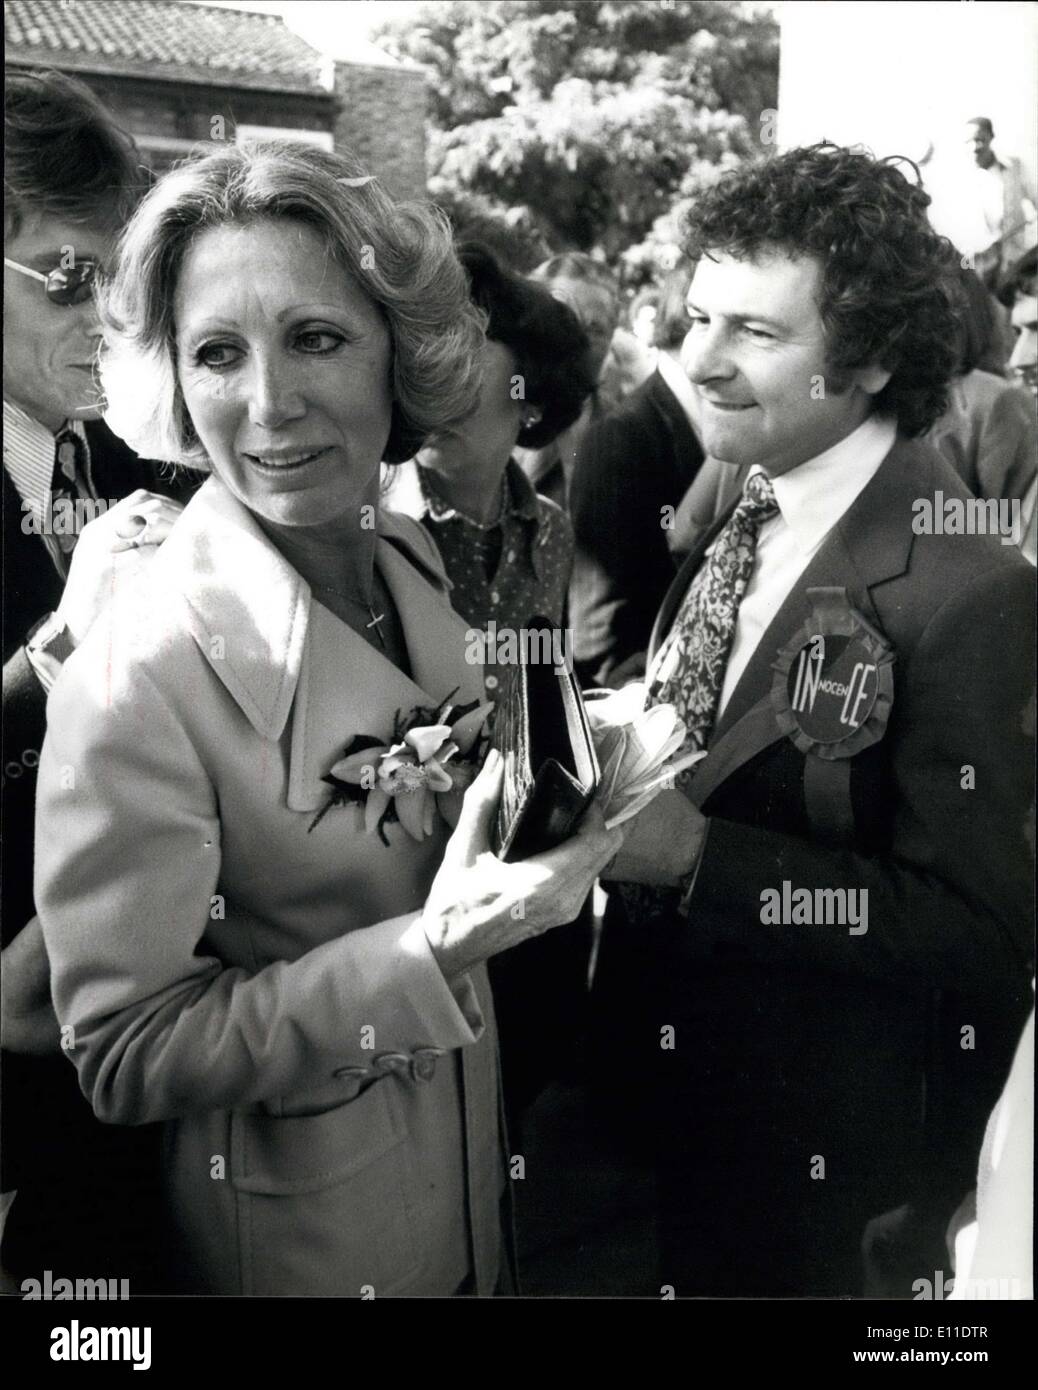 Sep. 07, 1977 - George ince weds former wife of Charles Kray : George Ince was allowed out of wormed scrubs prison for an hour today to marry the former wife of geroge Kray, Mrs. Dolly Gray at the Hammer-smith Register office - after the ceremony ince was take back to prison where he is serving 15 years for a bullin robbery. Photo shows Dolly Gray with Barry Howe (free George Ince Organiser) after the wedding ceremony at this hammer-smith R/O. this afternoon. Stock Photo